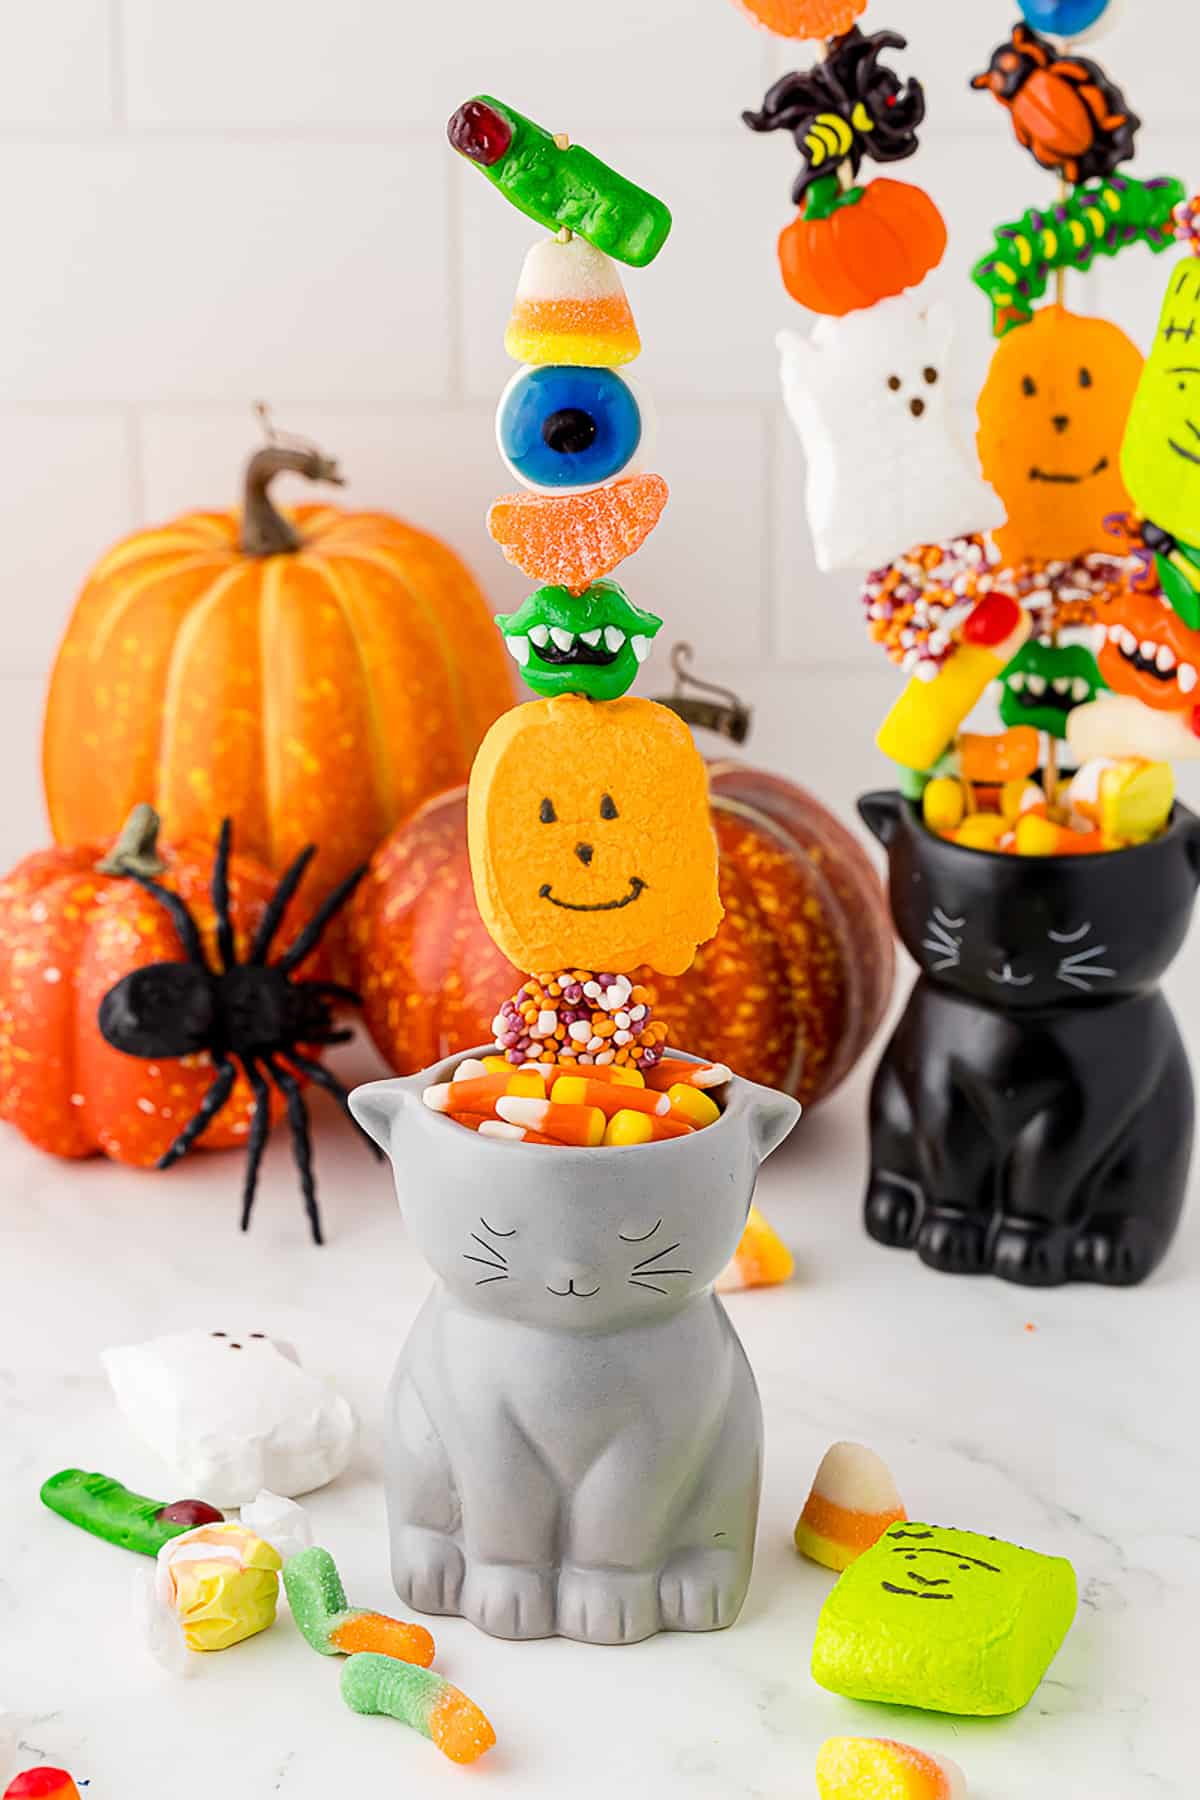 cat planter filled with candy corn and candy skewers of halloween candy kabobs on a white countertop with pumpkins in the background